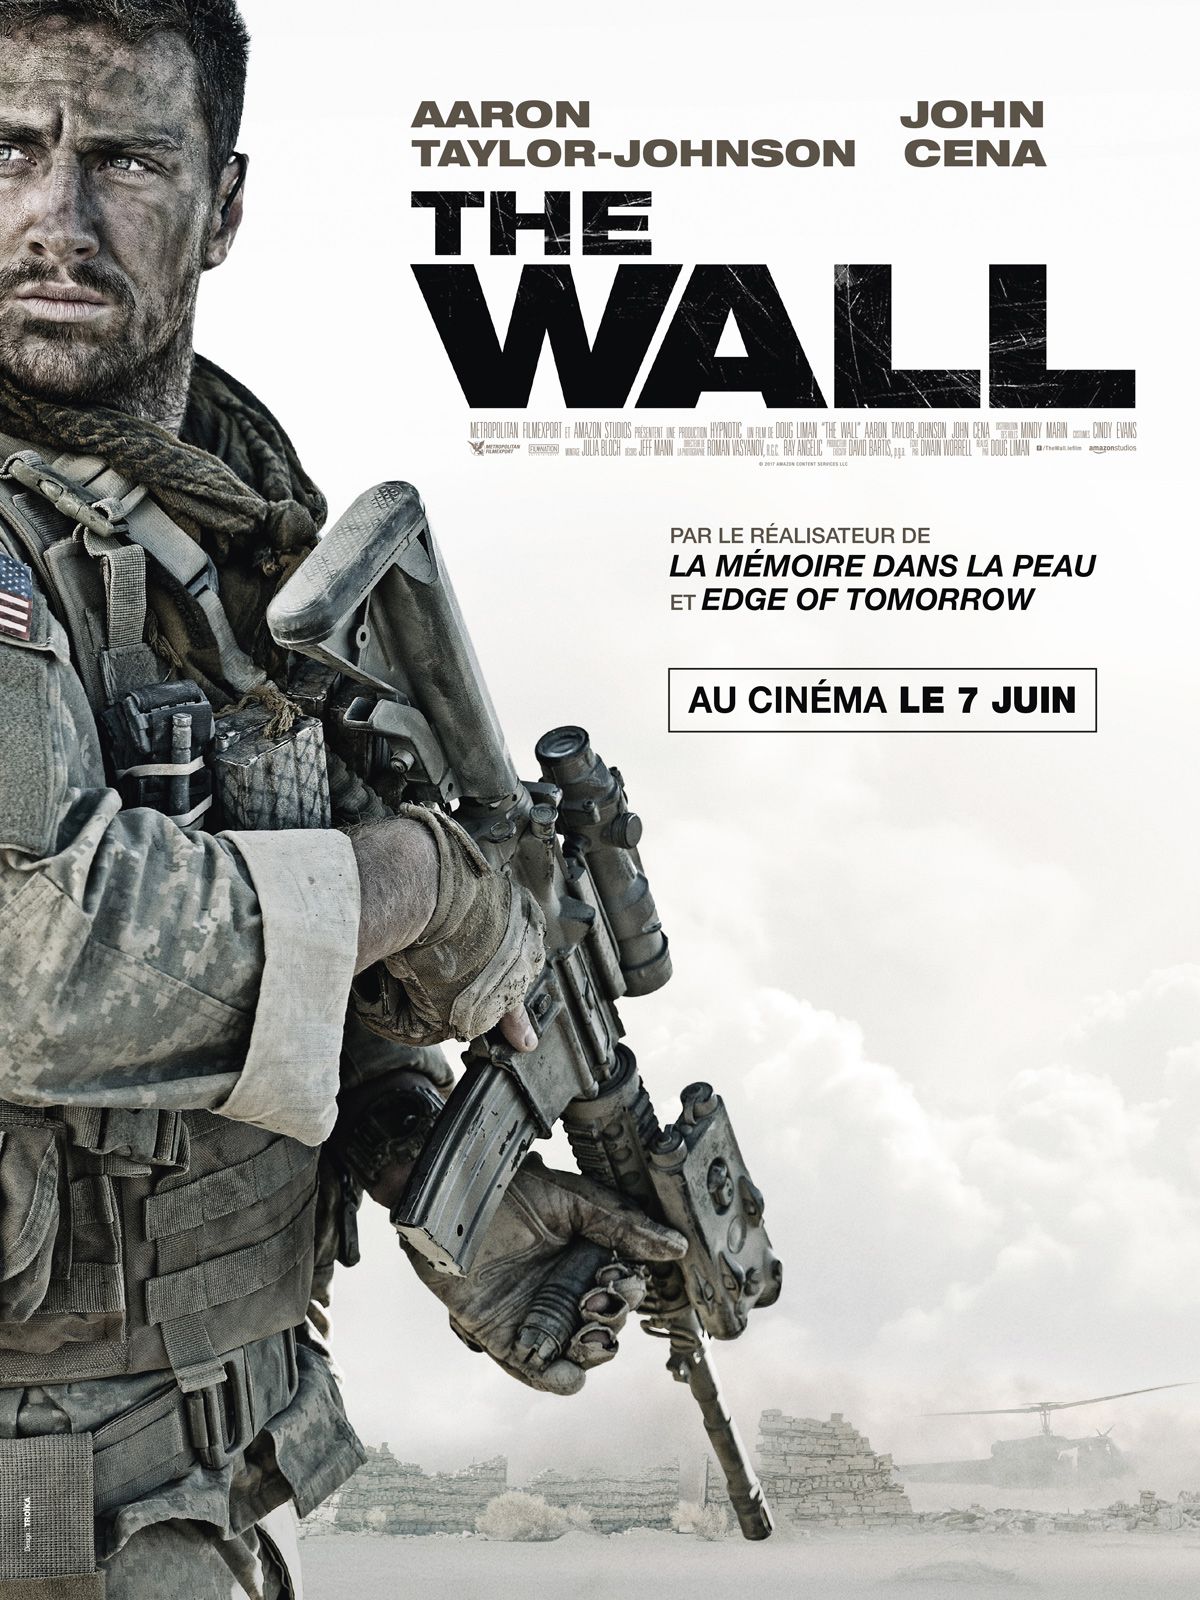 The Wall - Film (2017) streaming VF gratuit complet